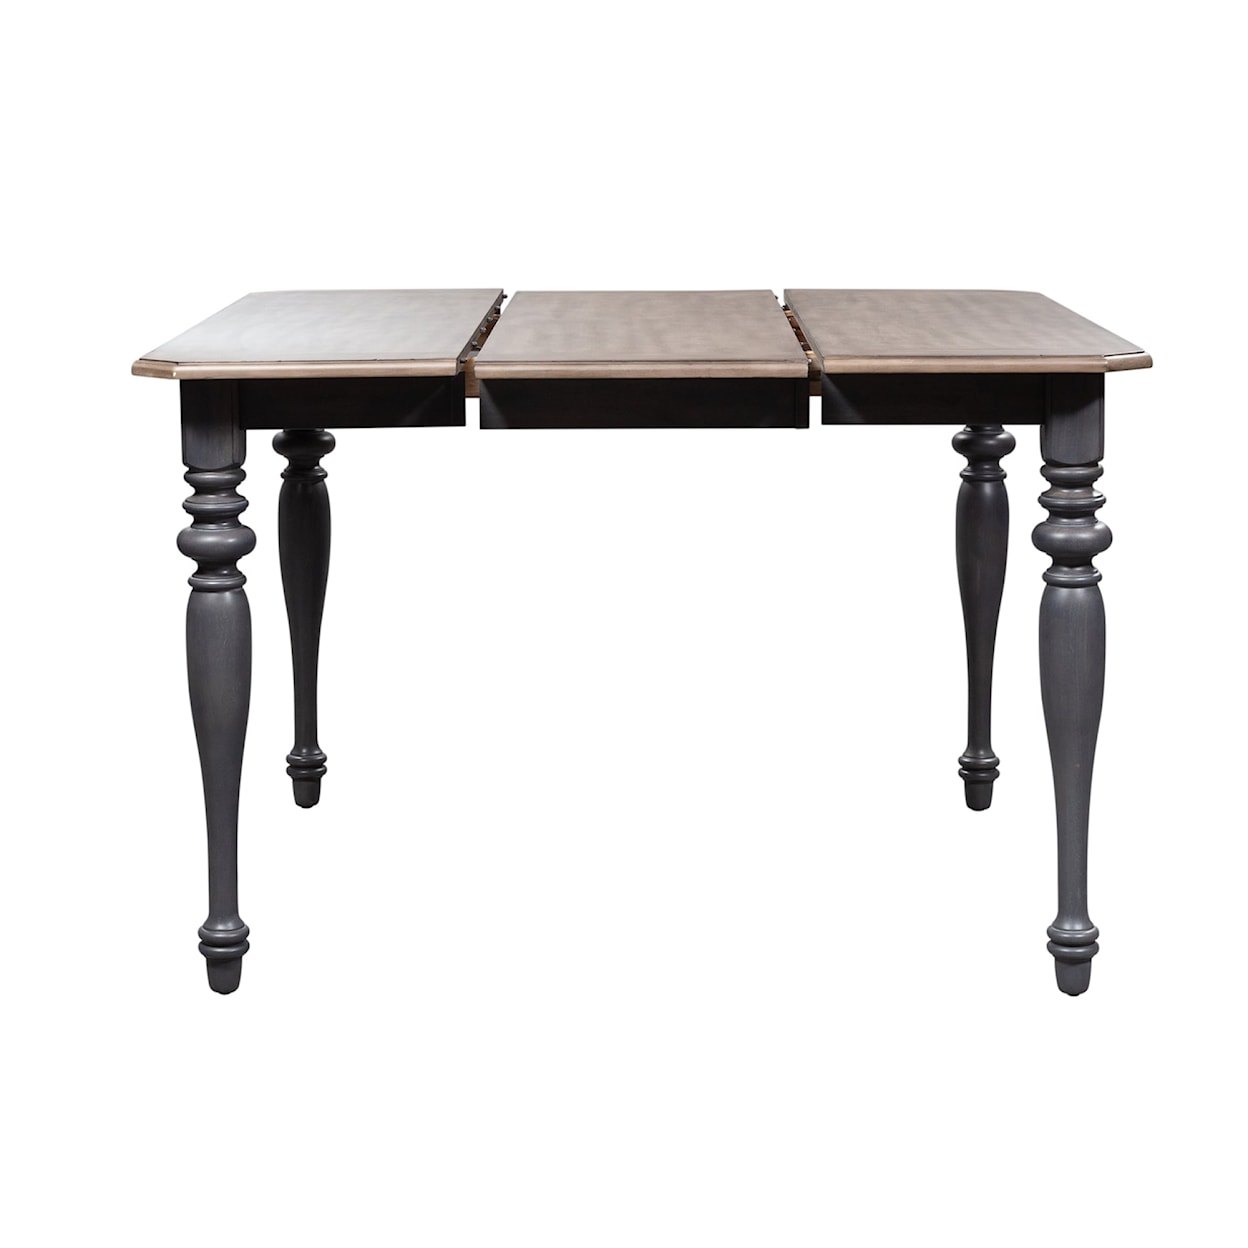 Libby Ocean Isle Rectangle Dining Table